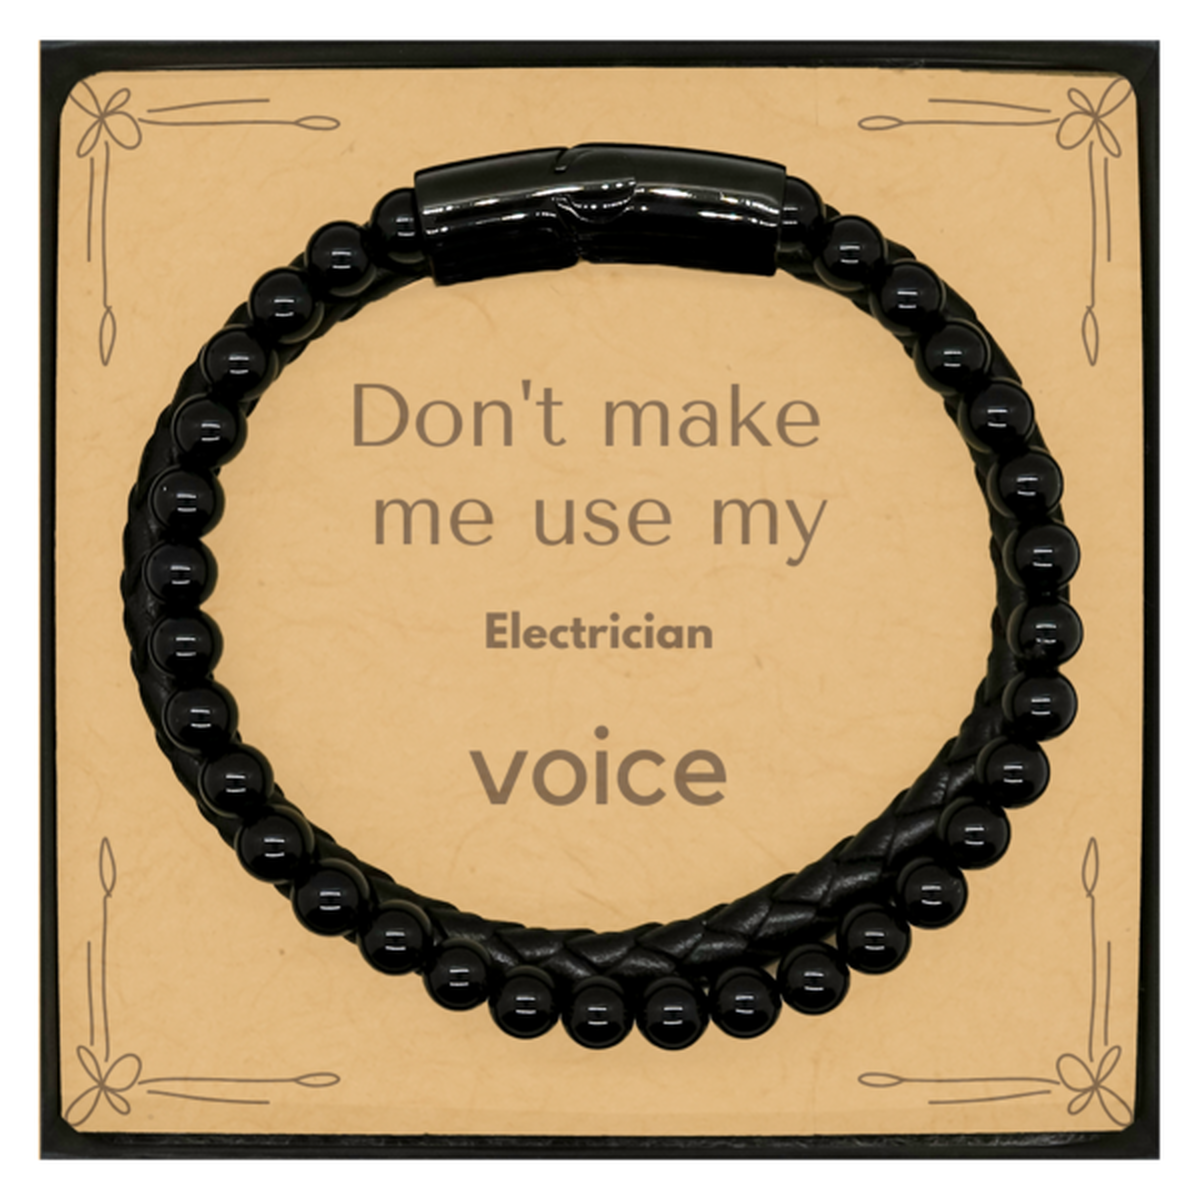 Don't make me use my Electrician voice, Sarcasm Electrician Card Gifts, Christmas Electrician Stone Leather Bracelets Birthday Unique Gifts For Electrician Coworkers, Men, Women, Colleague, Friends